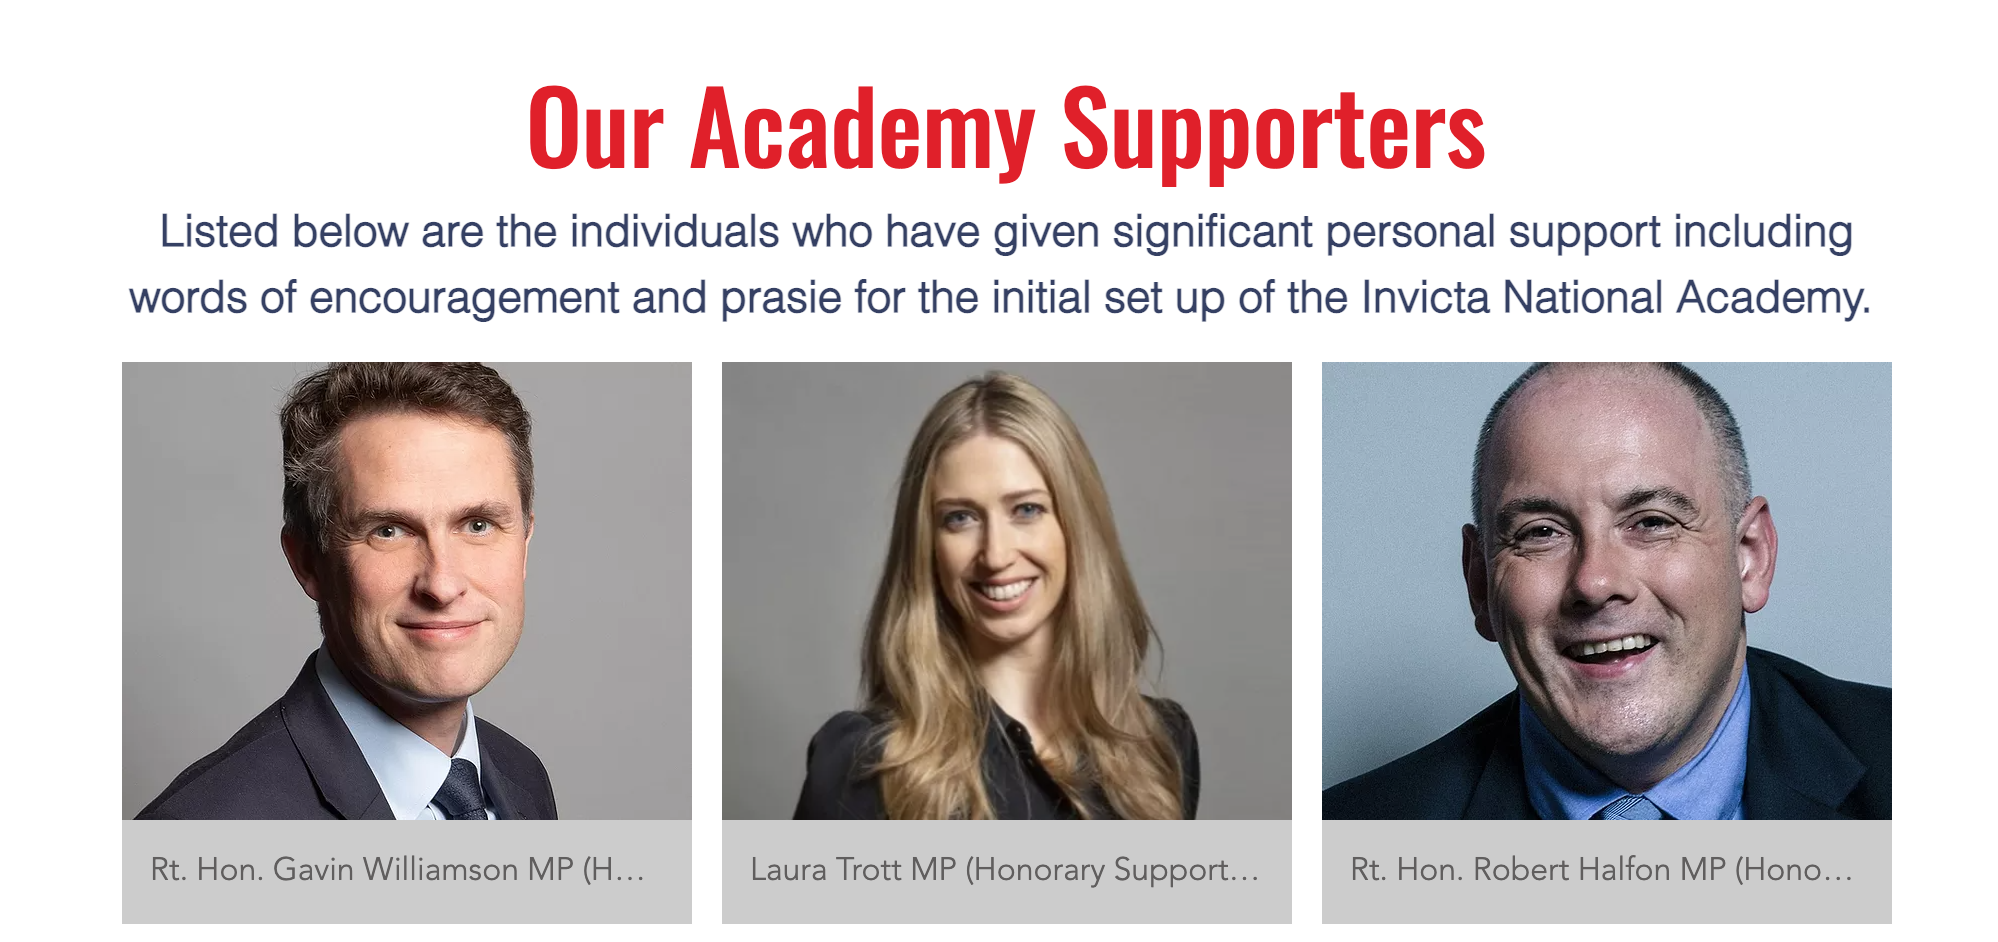 The amended website for the Invicta National Academy now lists Gavin Williamson as a supporter rather than a sponsor.